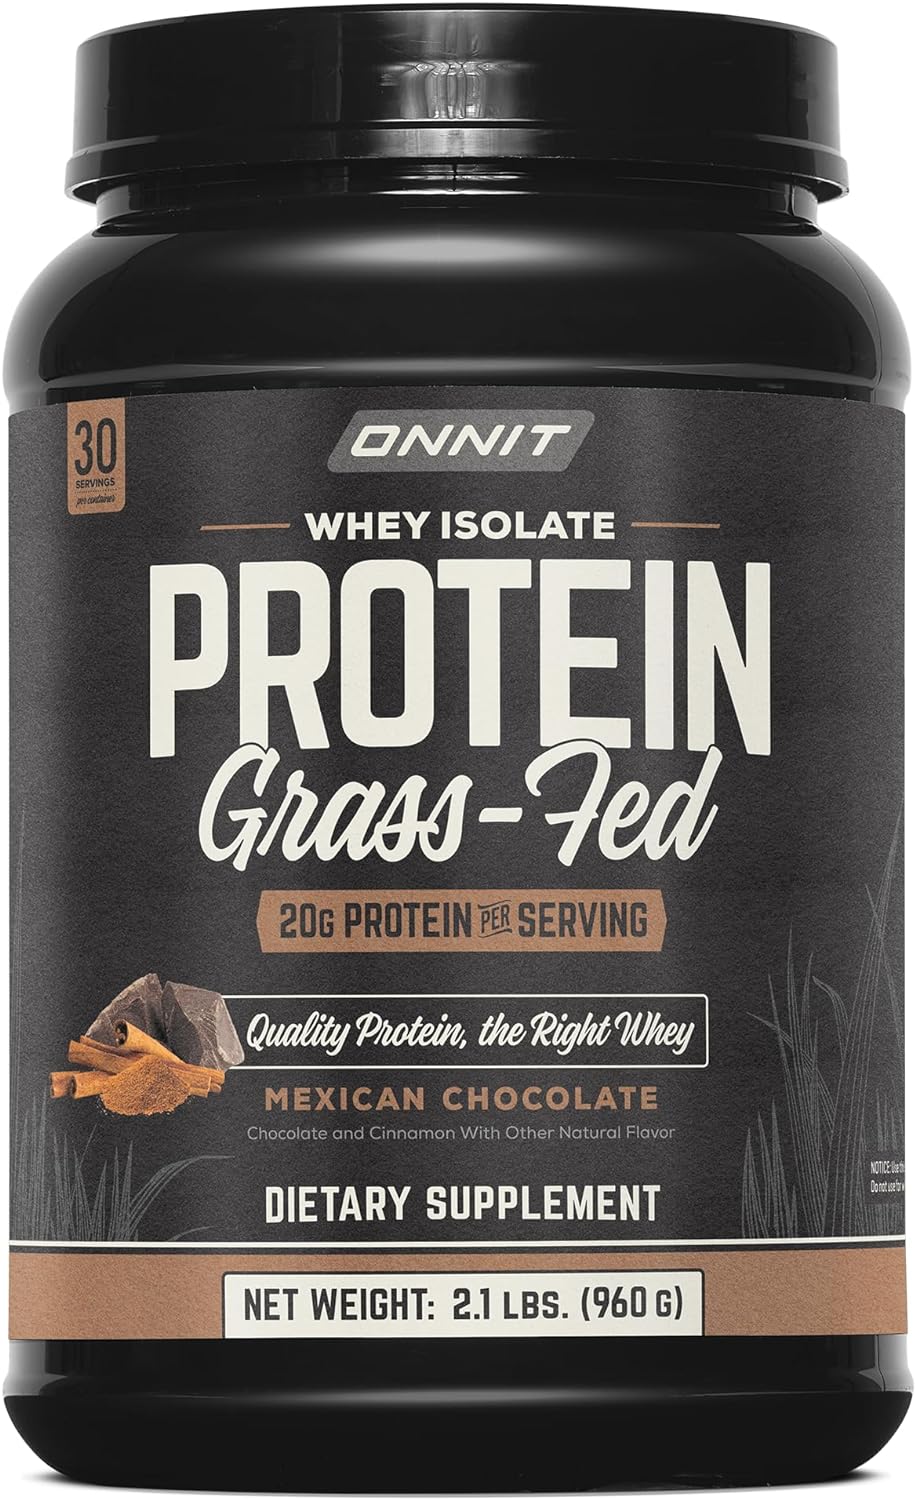 ONNIT-Grass-Fed-Whey-Isolate-Protein-335